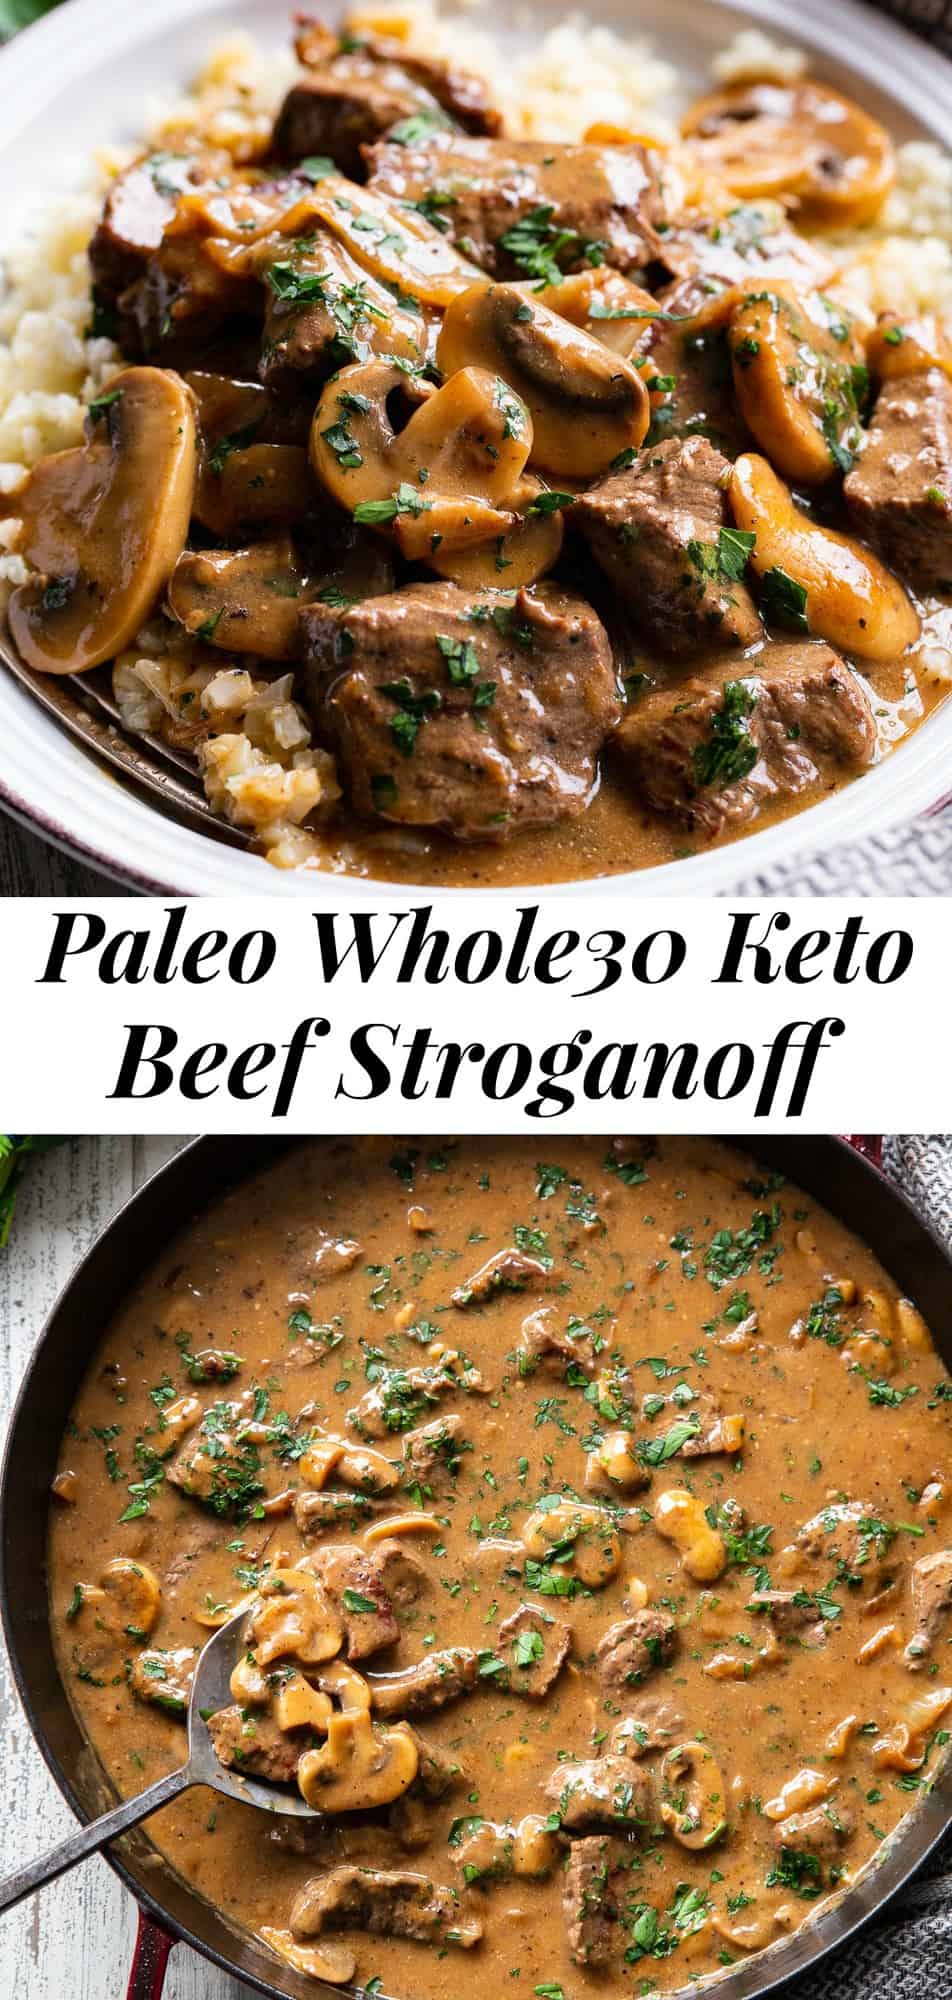 This hearty and savory paleo beef stroganoff is made all in one skillet for a quick, delicious and cozy weeknight meal.  It’s Whole30 compliant, low carb and keto and perfect served over sautéed cauliflower rice or your favorite veggie noodles! #paleo #whole30 #cleaneating #keto #lowcarb